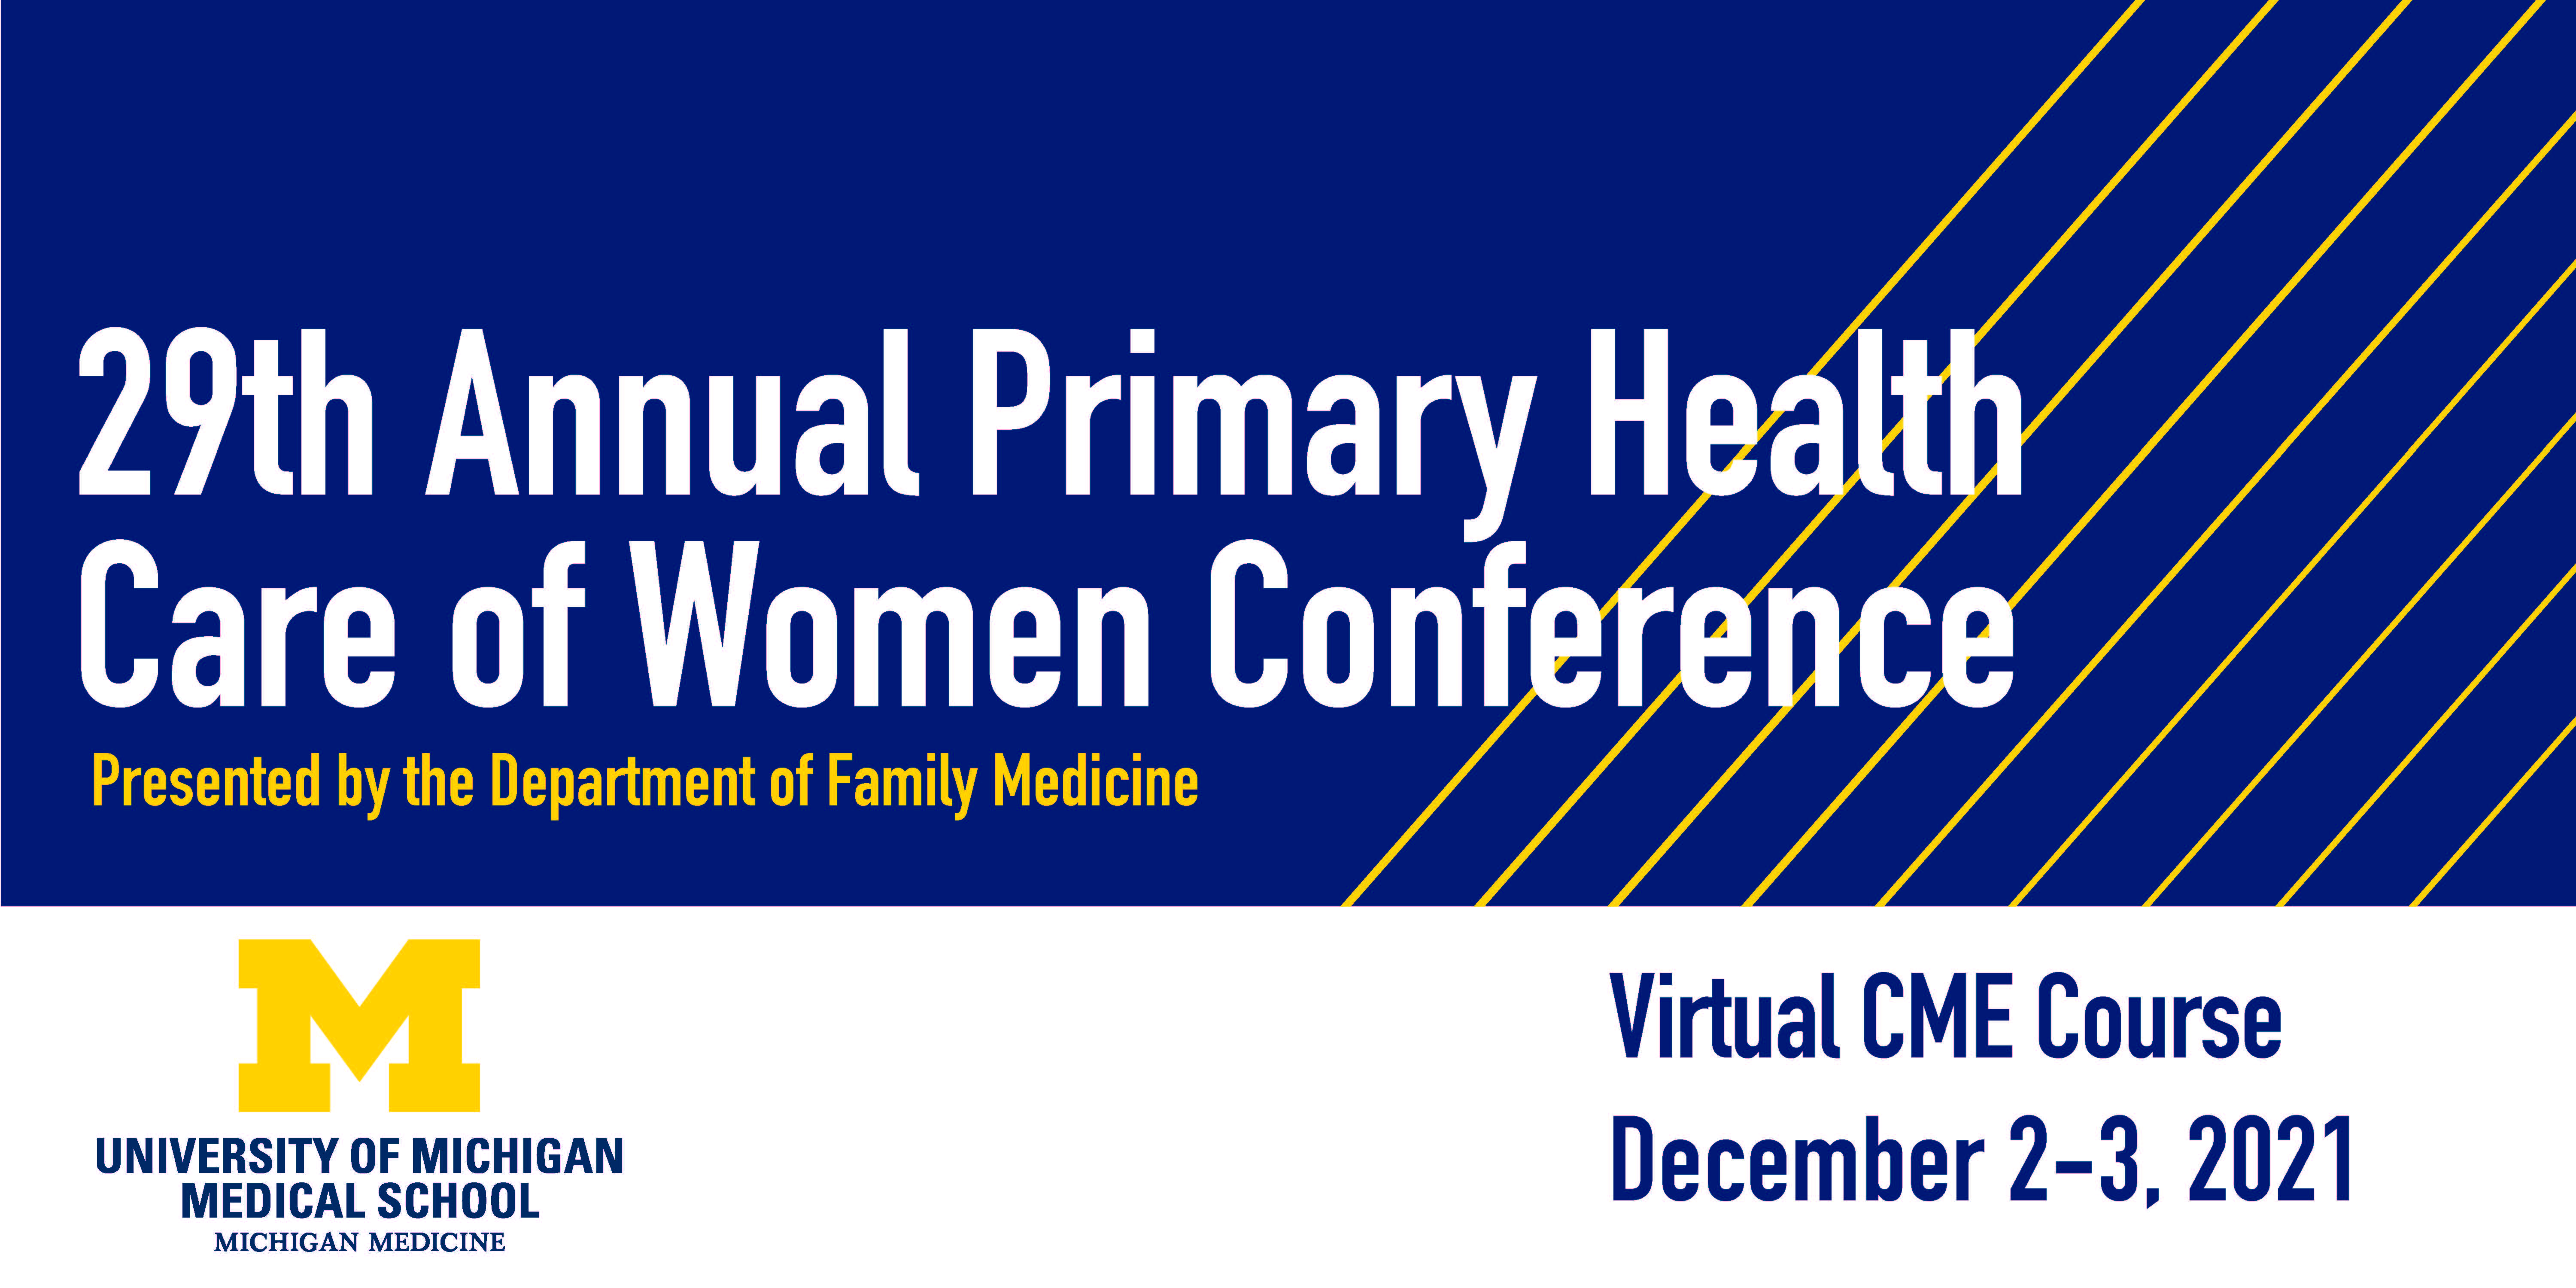 REads: 29th Annual Primary Health Care of Women Conference Presented by the Department of Family Medicine Virtual CME Course December 2-3, 2021, features Block M Logo with University of Michigan Medical School and Michigan Medicine